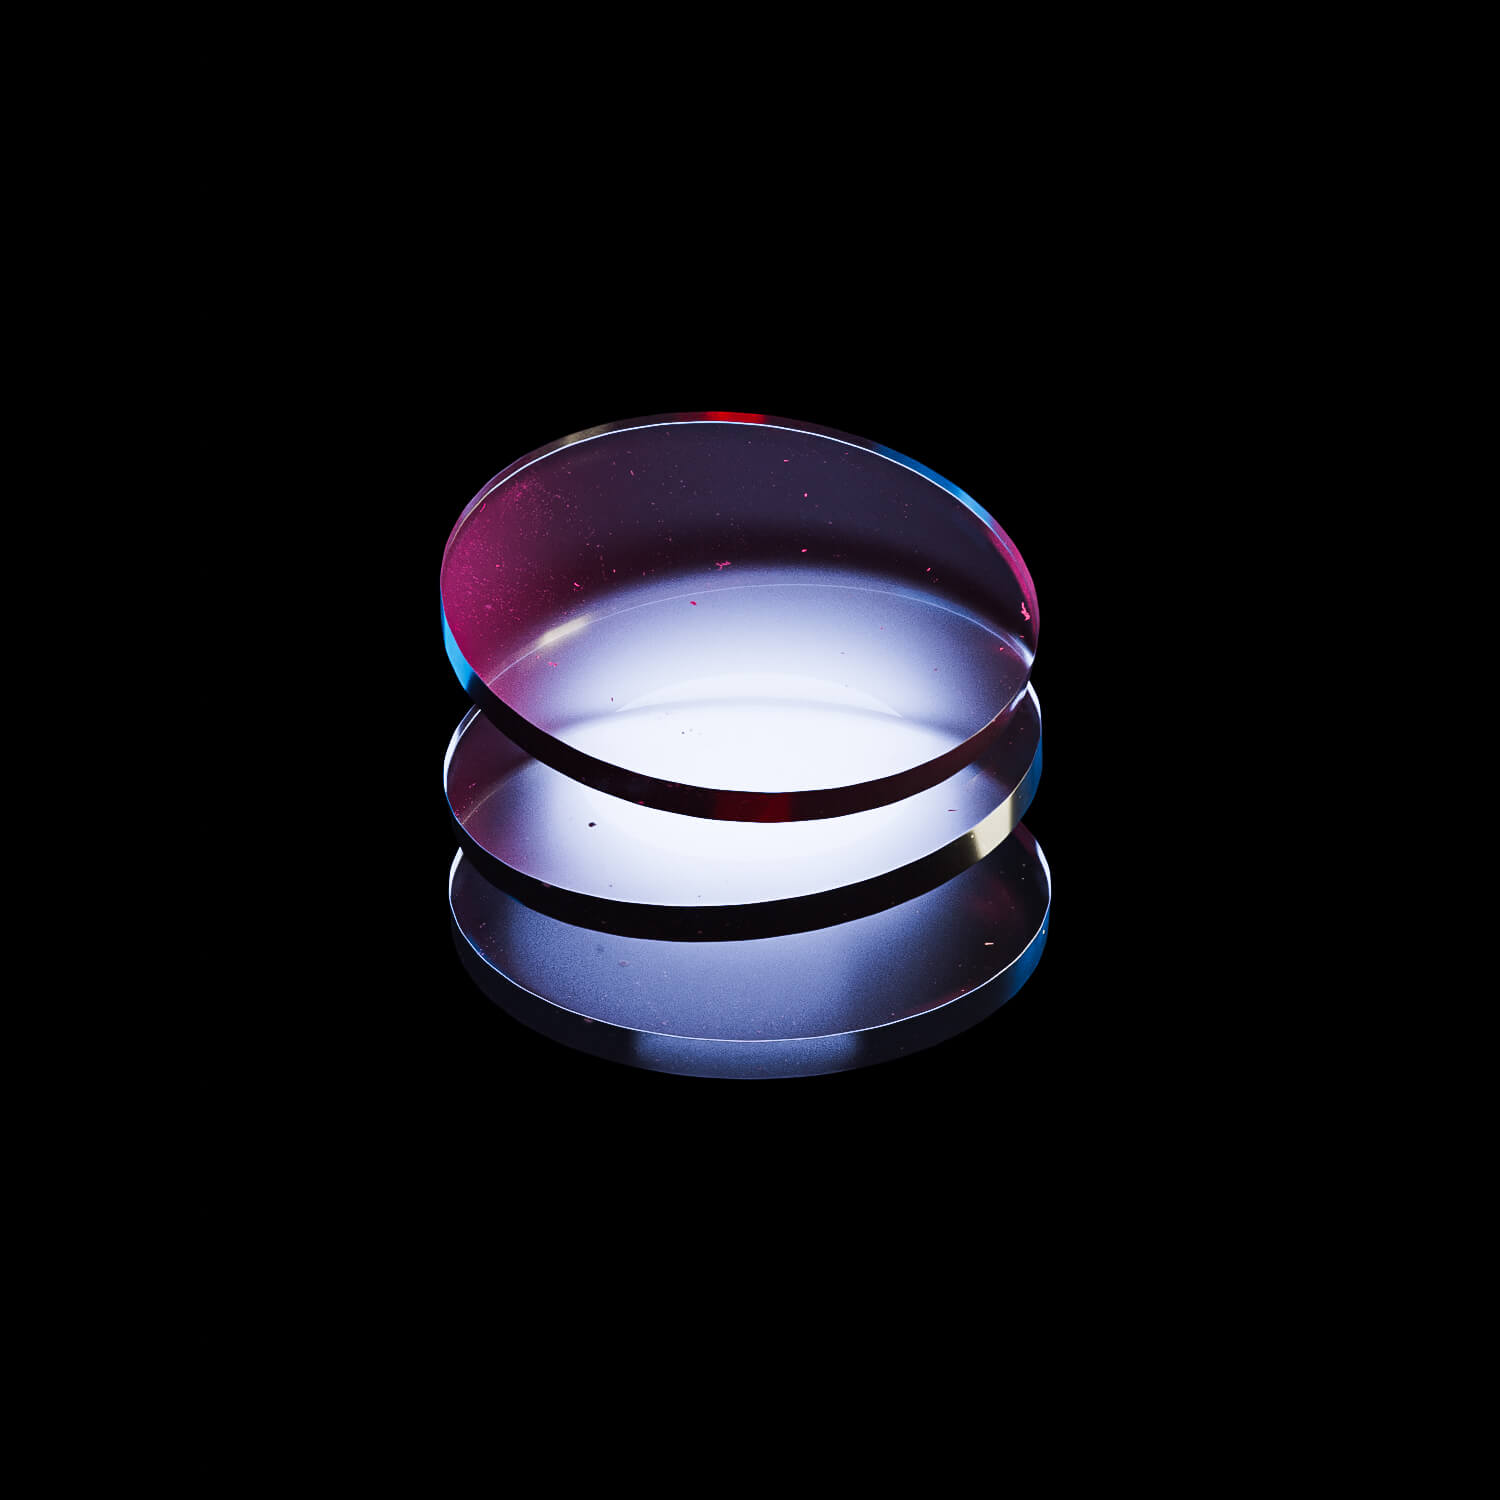 Three frosted glass discs with red and blue light cast onto them against a dark background